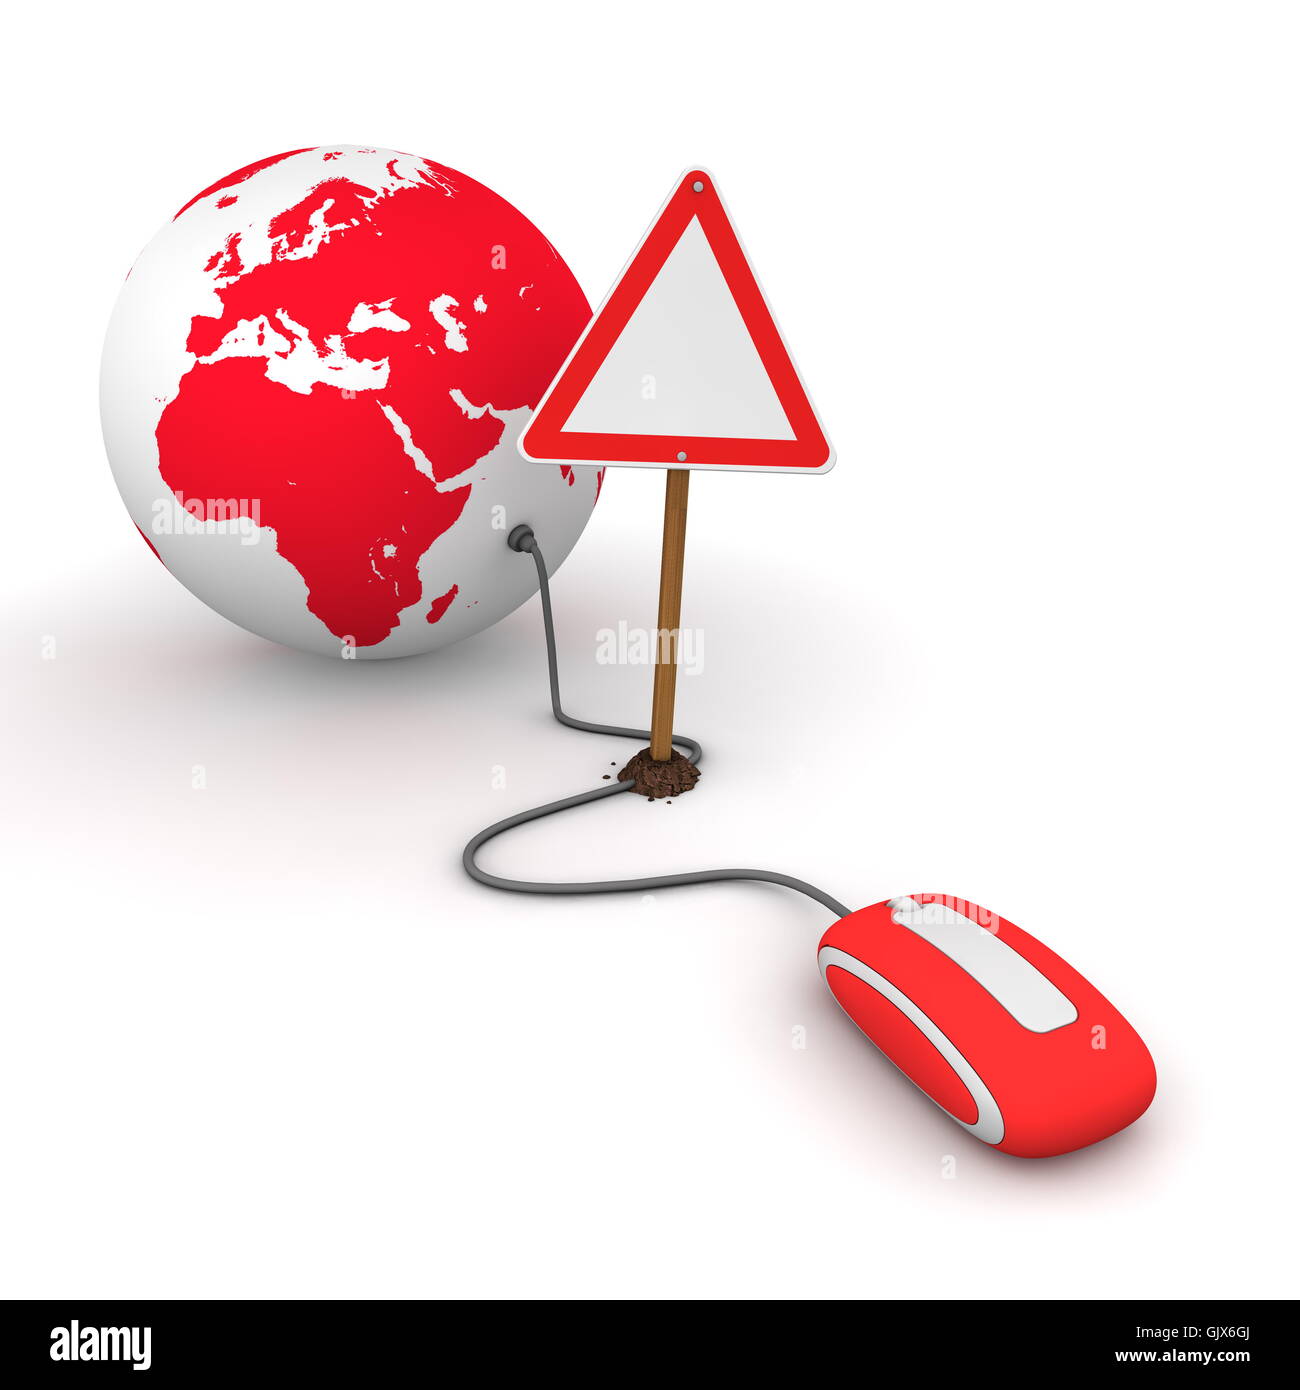 Surfing the Web in Red - Blocked by a Triangular Warning Sign Stock Photo